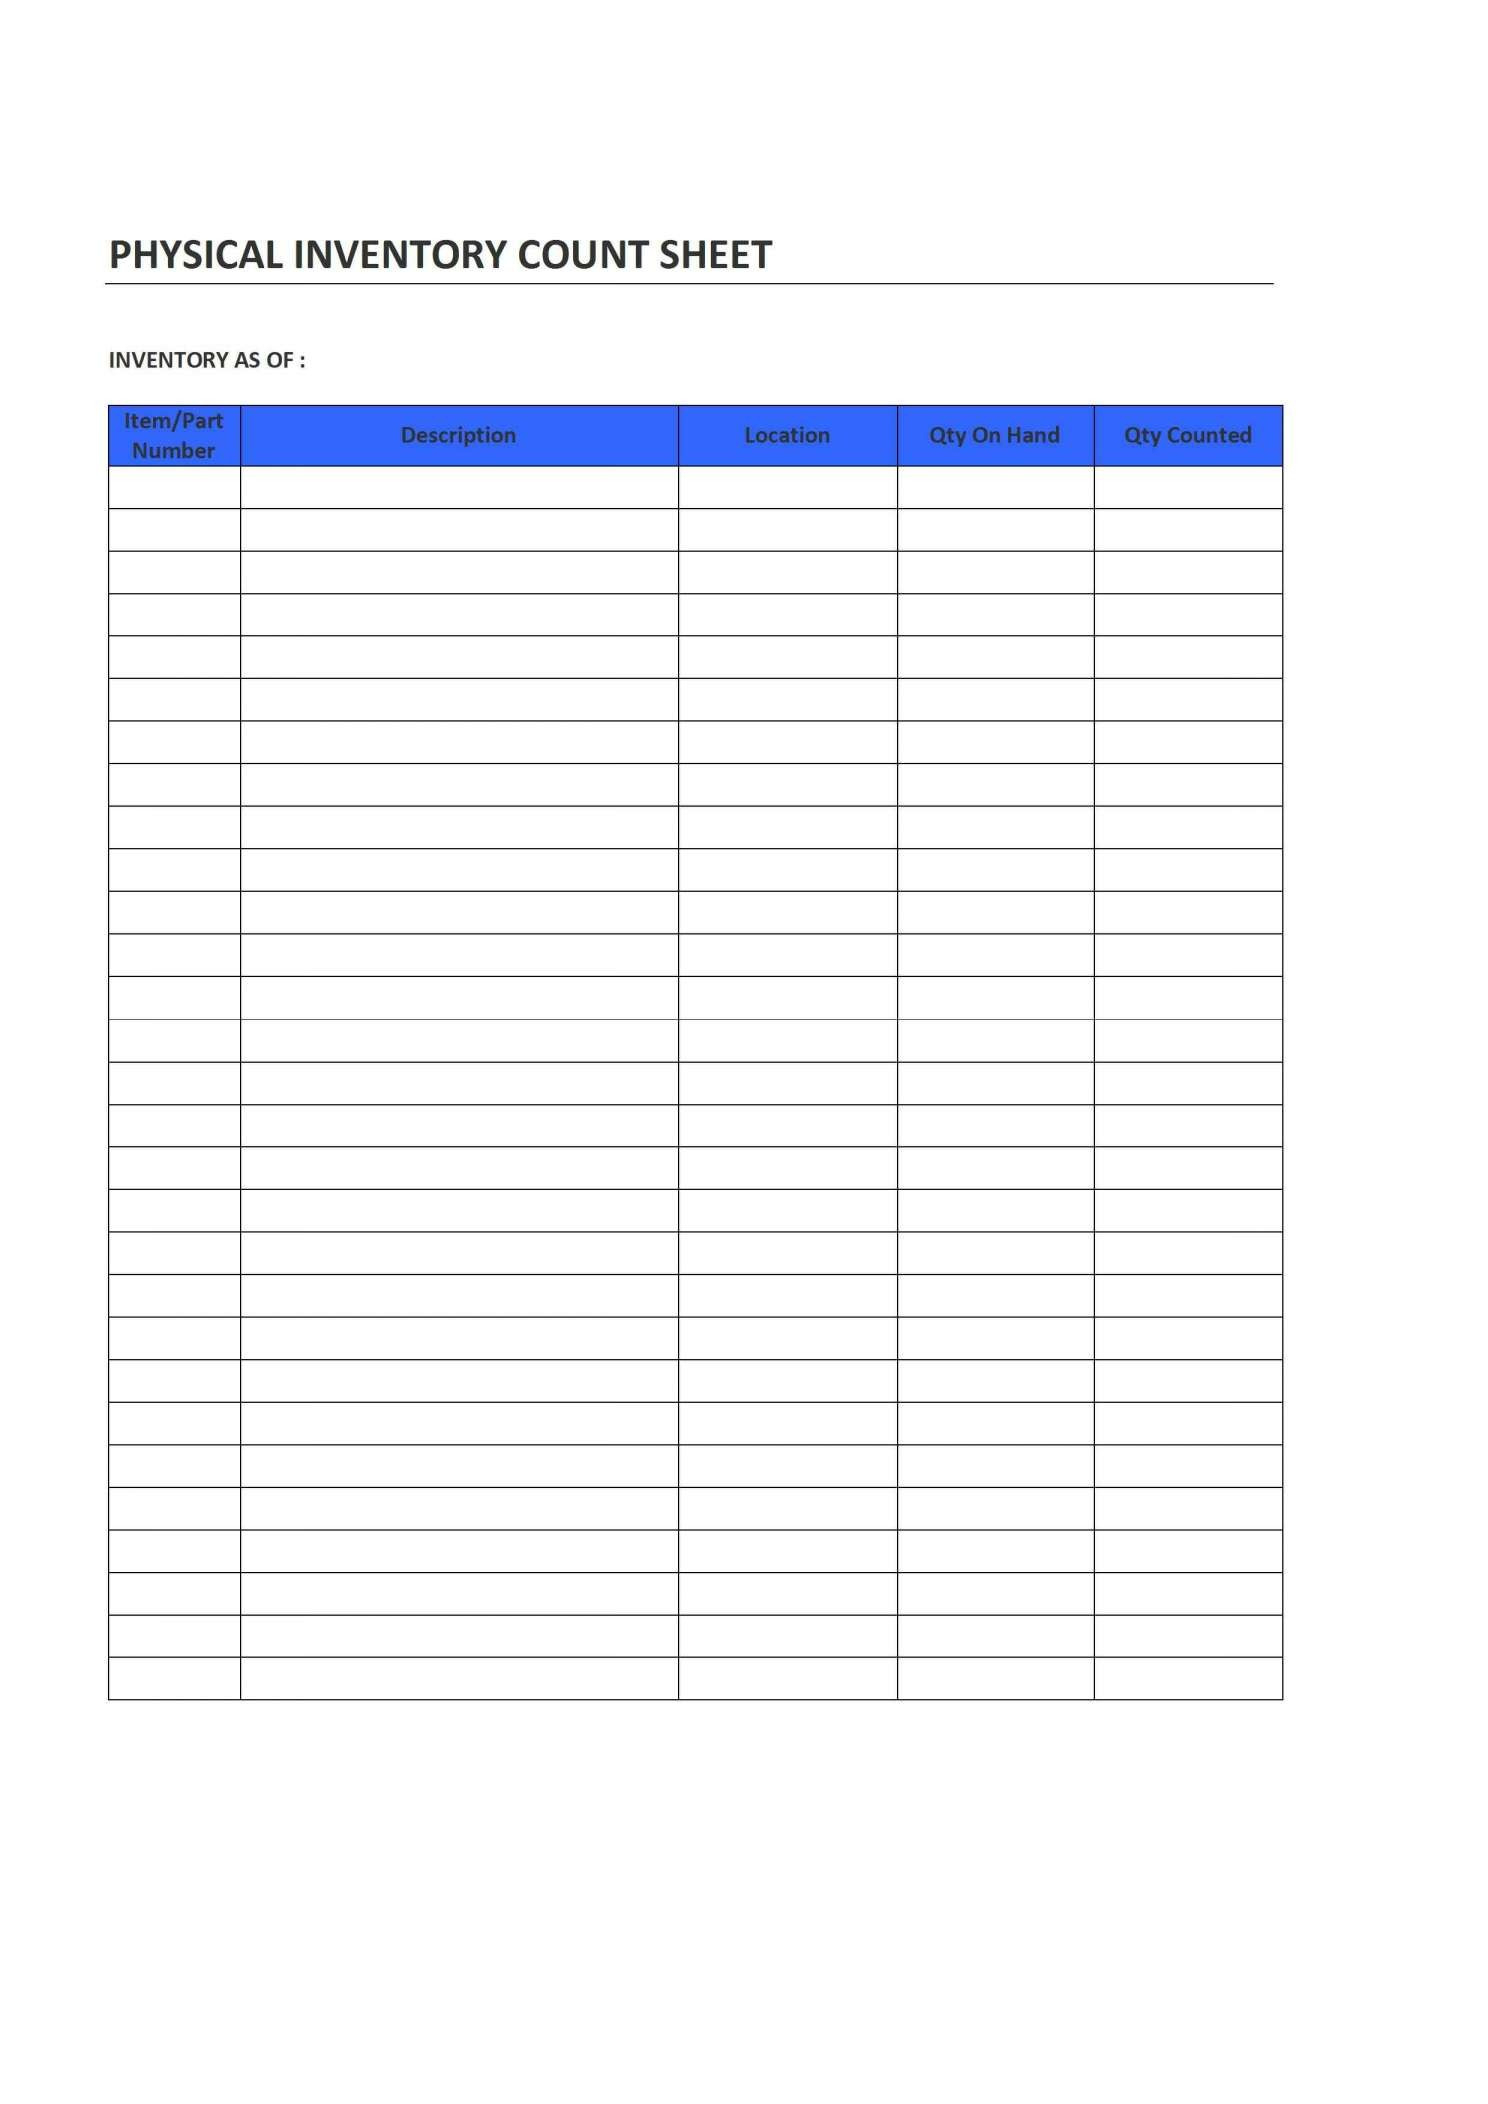 Inventory Spreadsheet Template Excel Product Tracking Luxury with Excel Inventory Tracking Spreadsheet